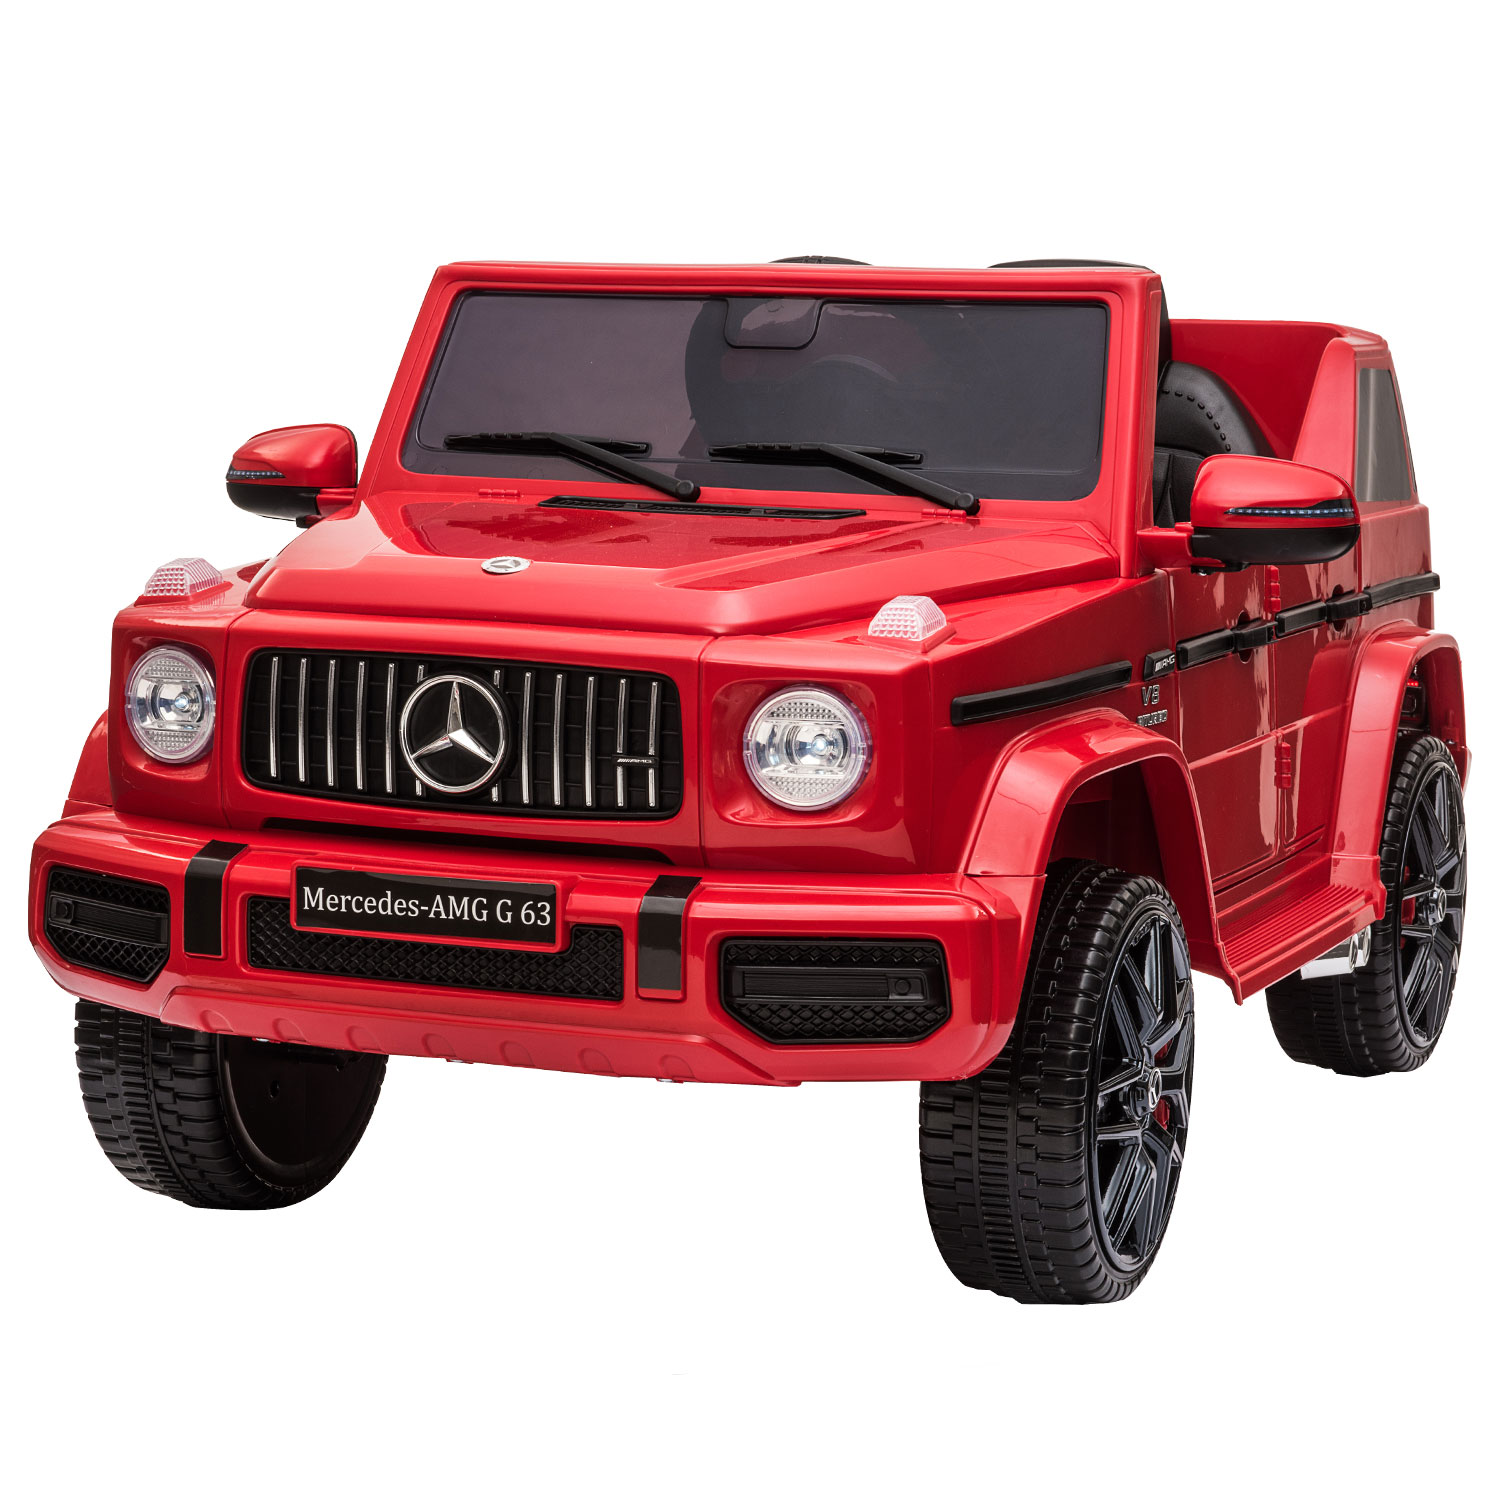 12V kids Ride On Jeep with Remote Control, Electric Car for Kids 3-6 Years, 3 Speeds, Music Story Playing, LED Lights, MP3 Player,Red-Boyel Living